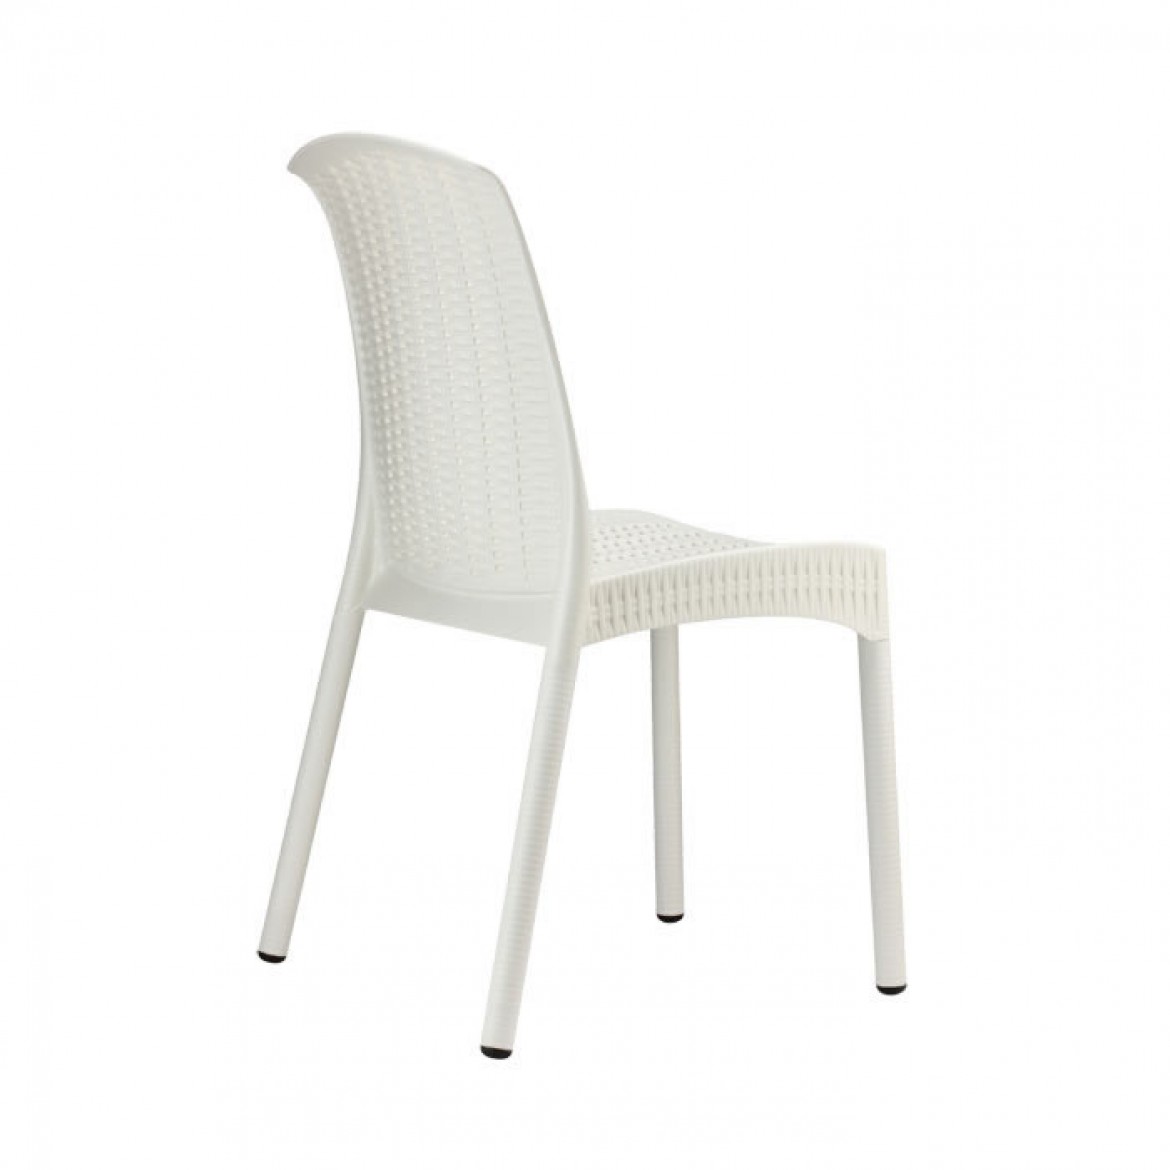 OLIMPIA TREND CHAIR